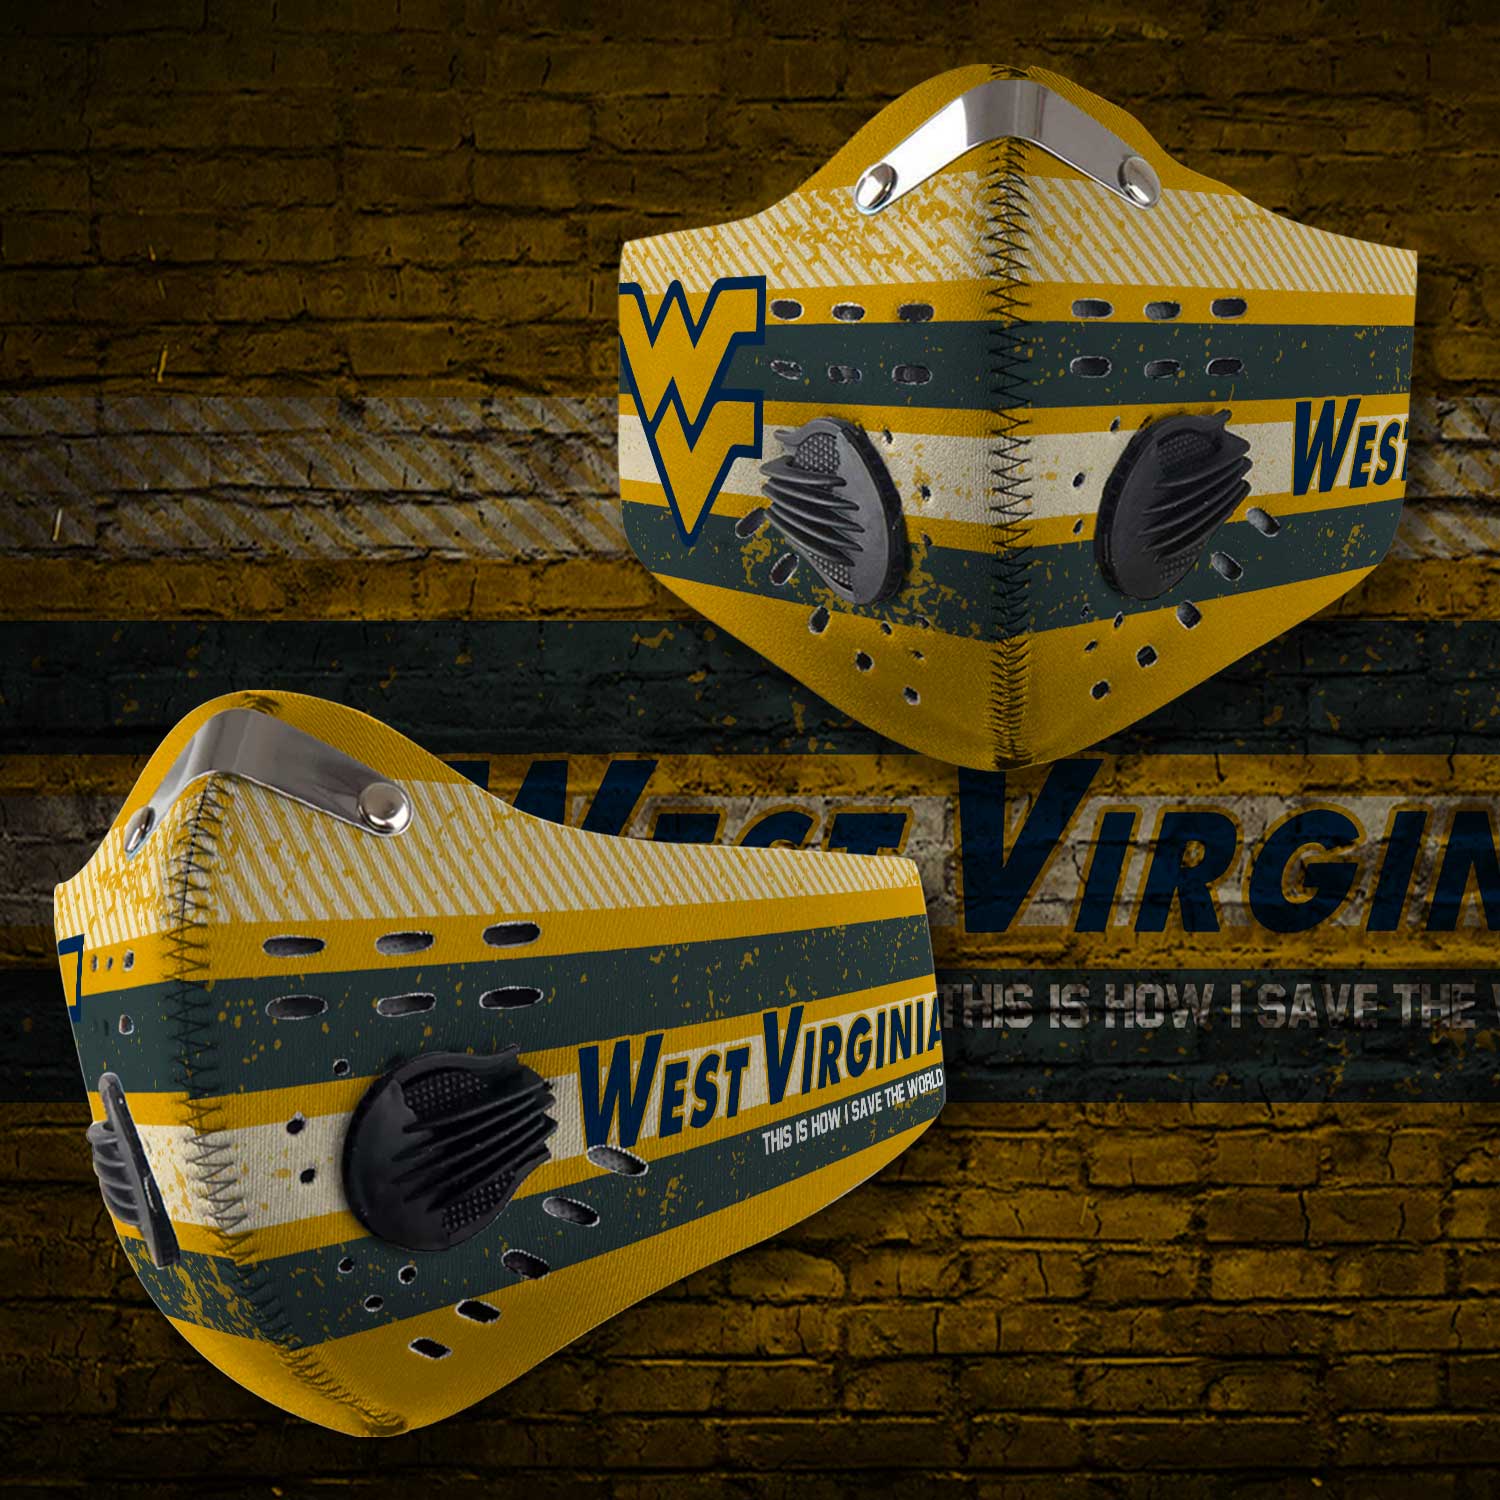 West virginia mountaineers this is how i save the world face mask – maria